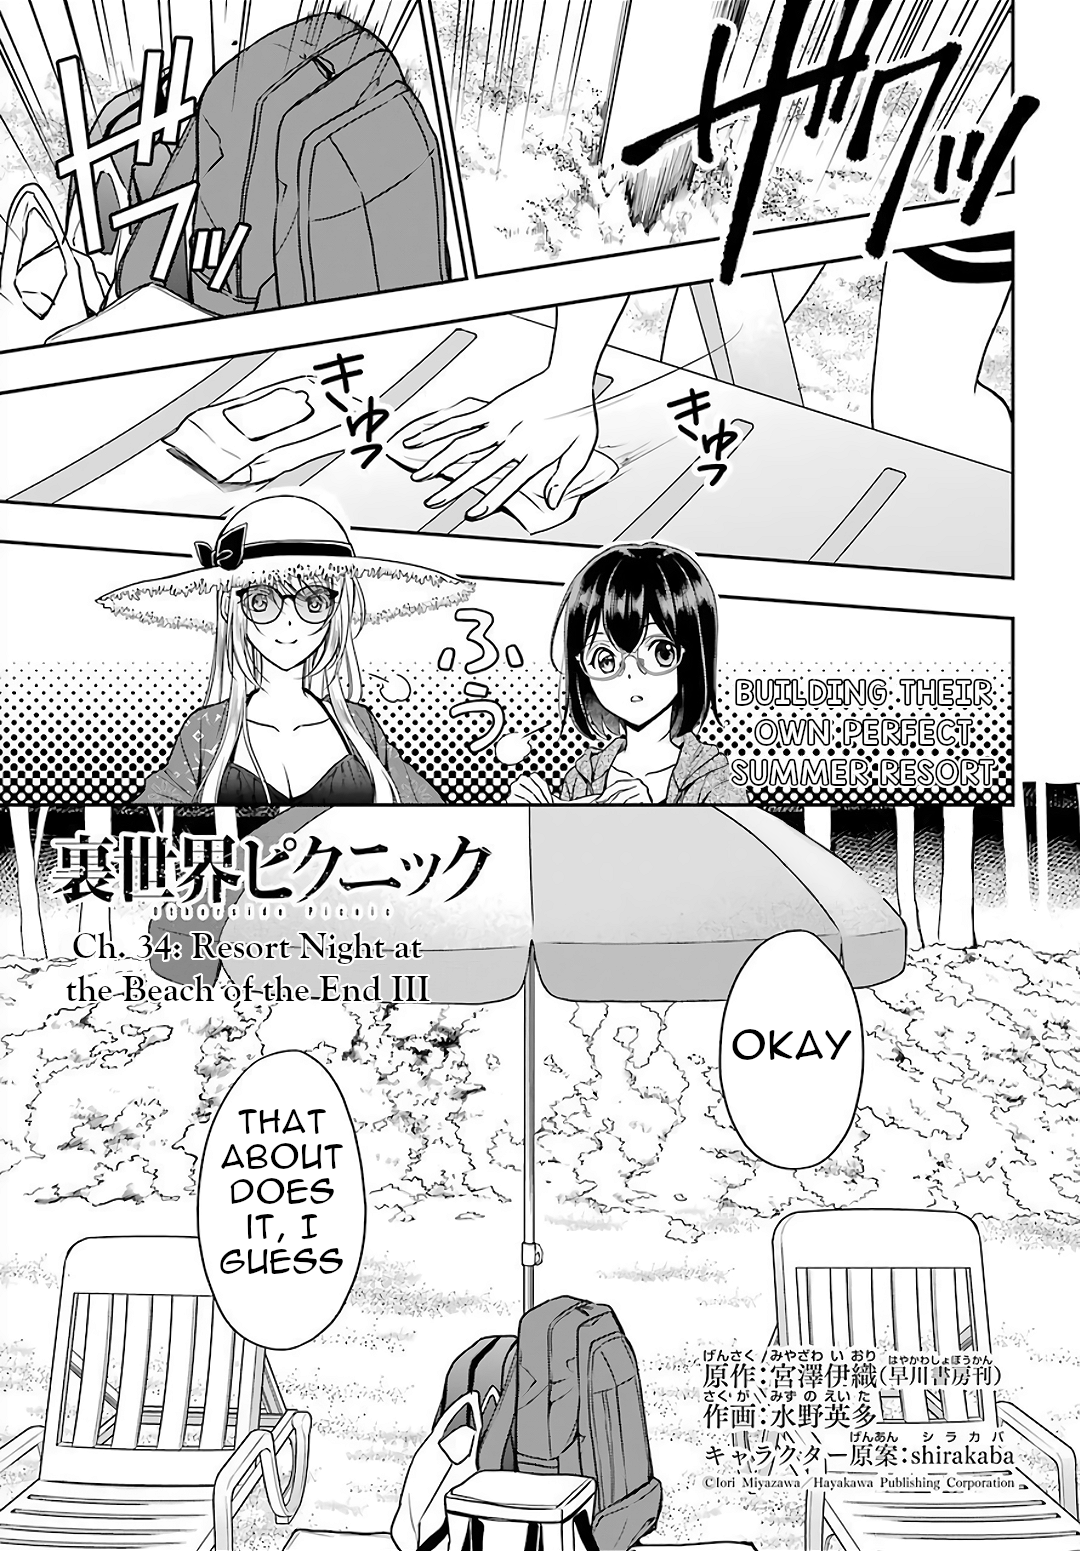 Urasekai Picnic Vol.6 Chapter 34: Resort Night At The Beach Of The End Iii - Picture 2